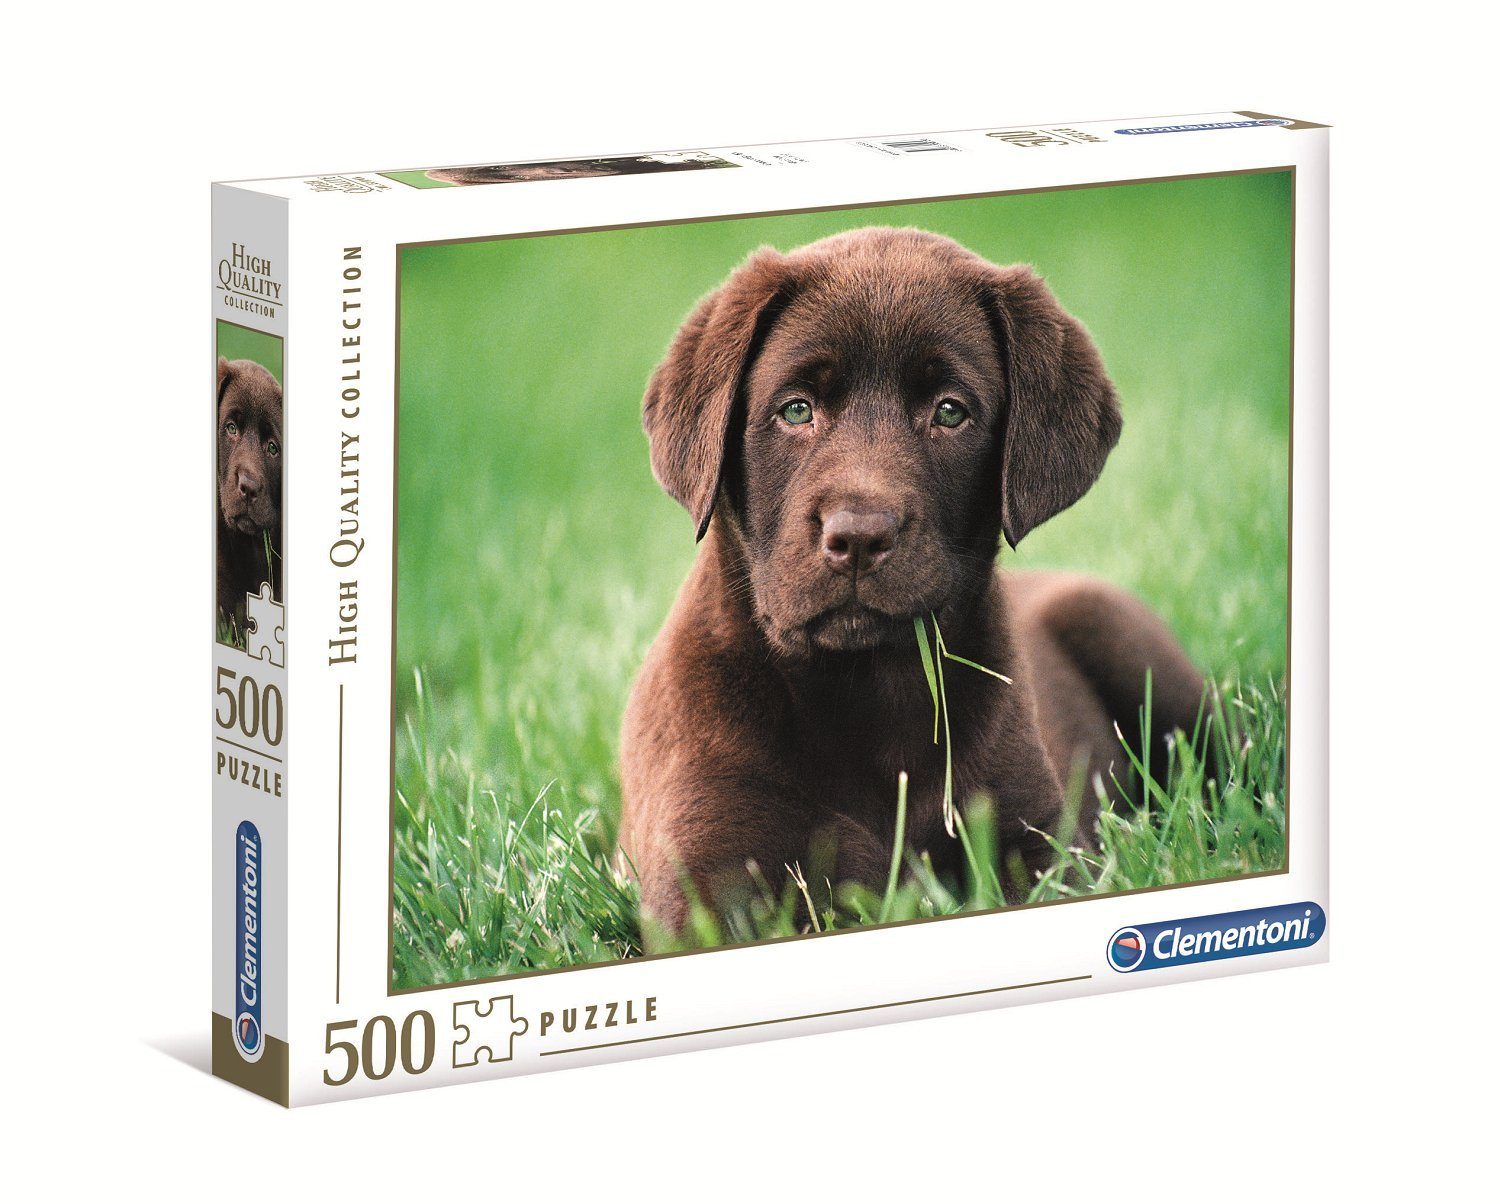 Clementoni® Puzzle High Quality Collection Chocolate Puppy 500 Teile, Puzzleteile